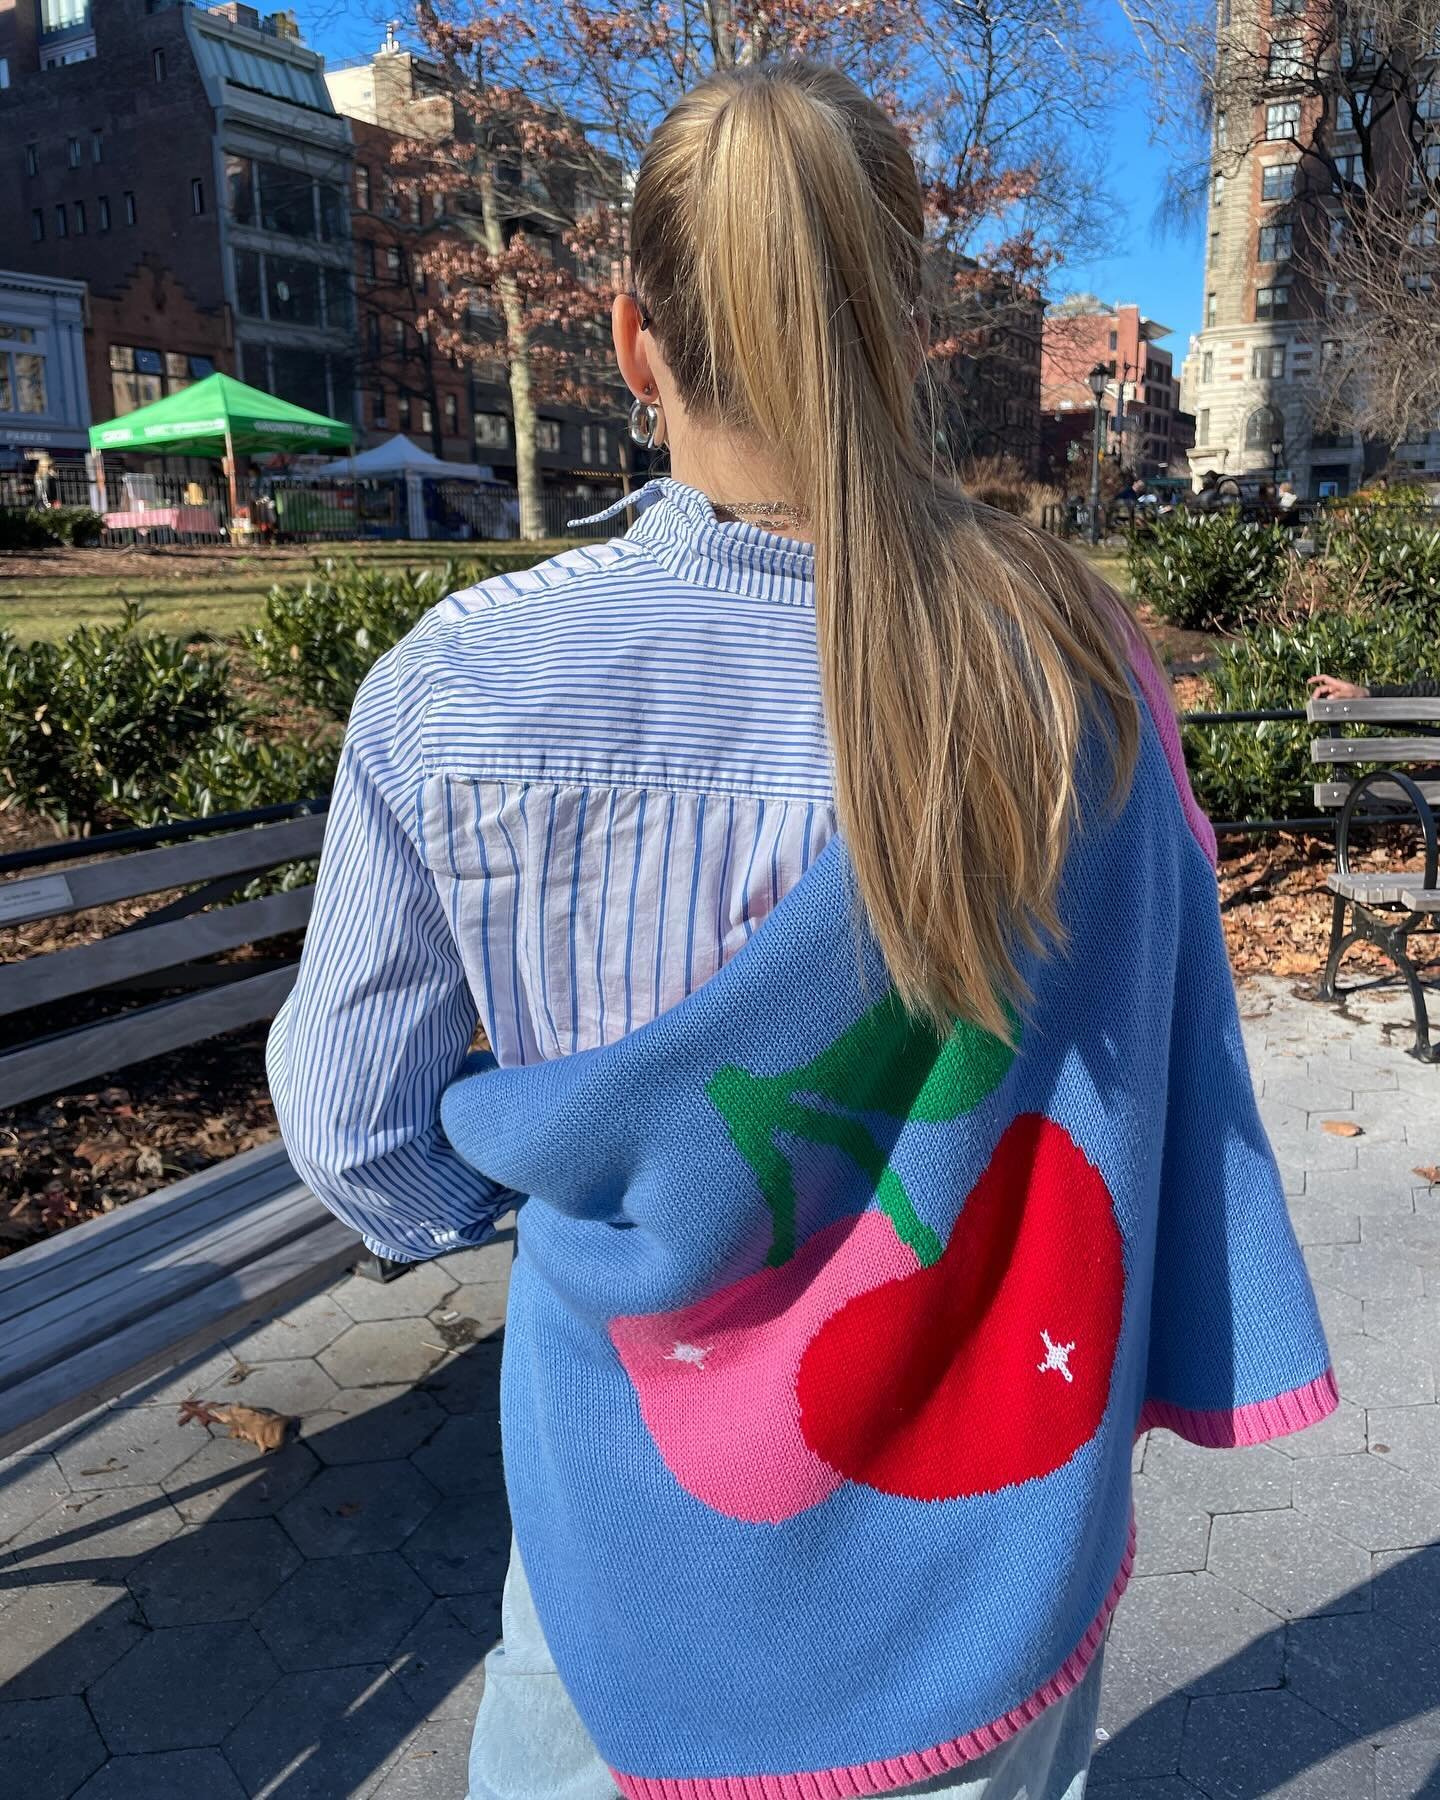 Casual UWS day in the Nissa Sweater!💙🍒✨

#sweaterdesign #colorfulfashion #dopaminedressing #nyc #upperwestside